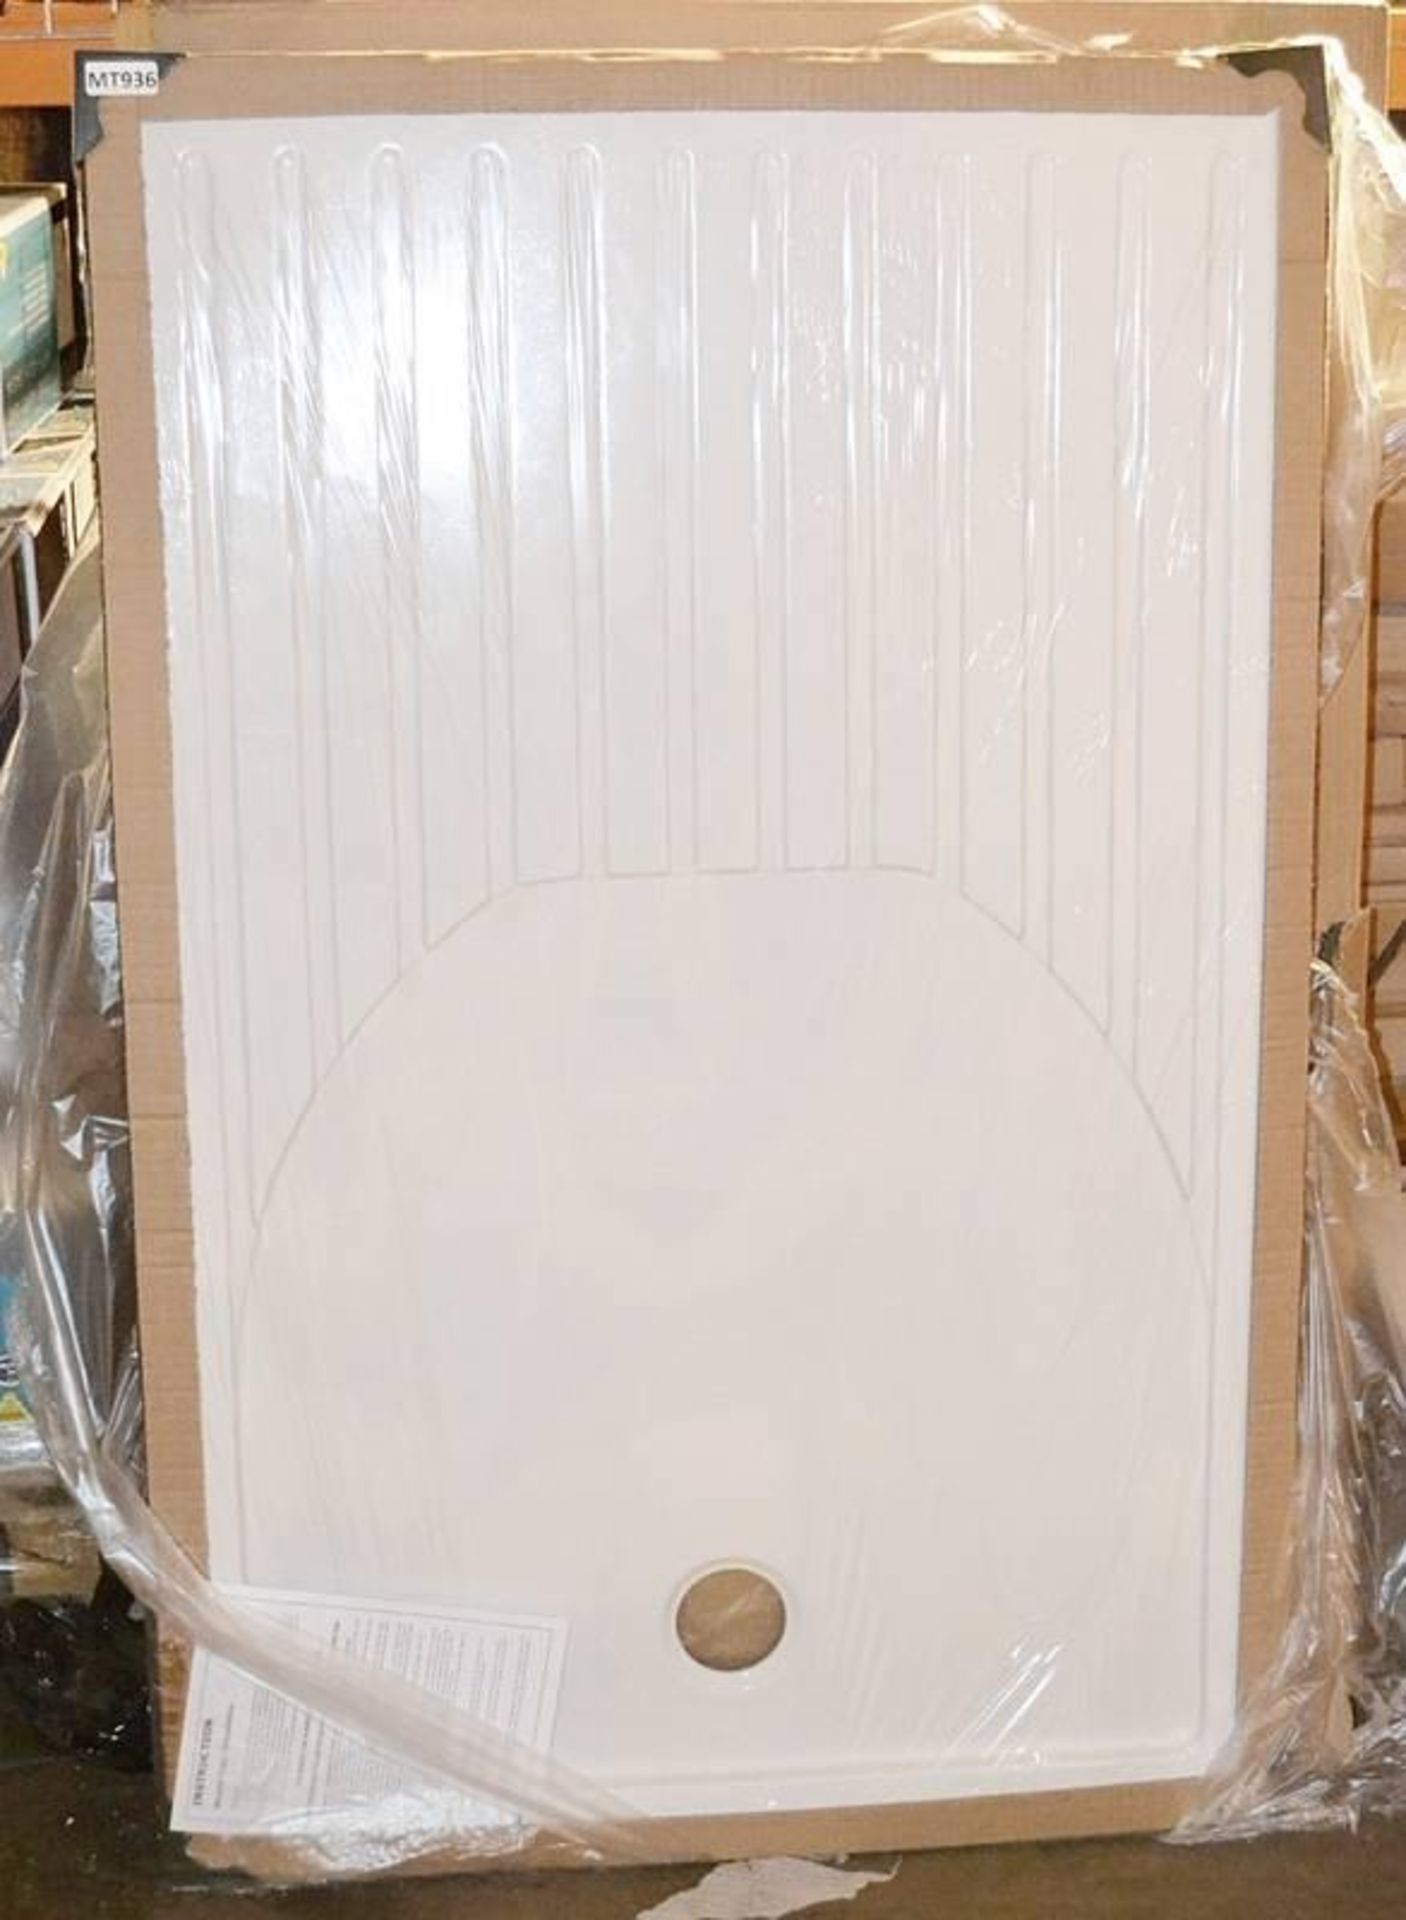 1 x Walk In Rectangular Shower Tray (BSF1490C) - Dimensions: 1400 x 900 x 40cm - New And Boxed Stock